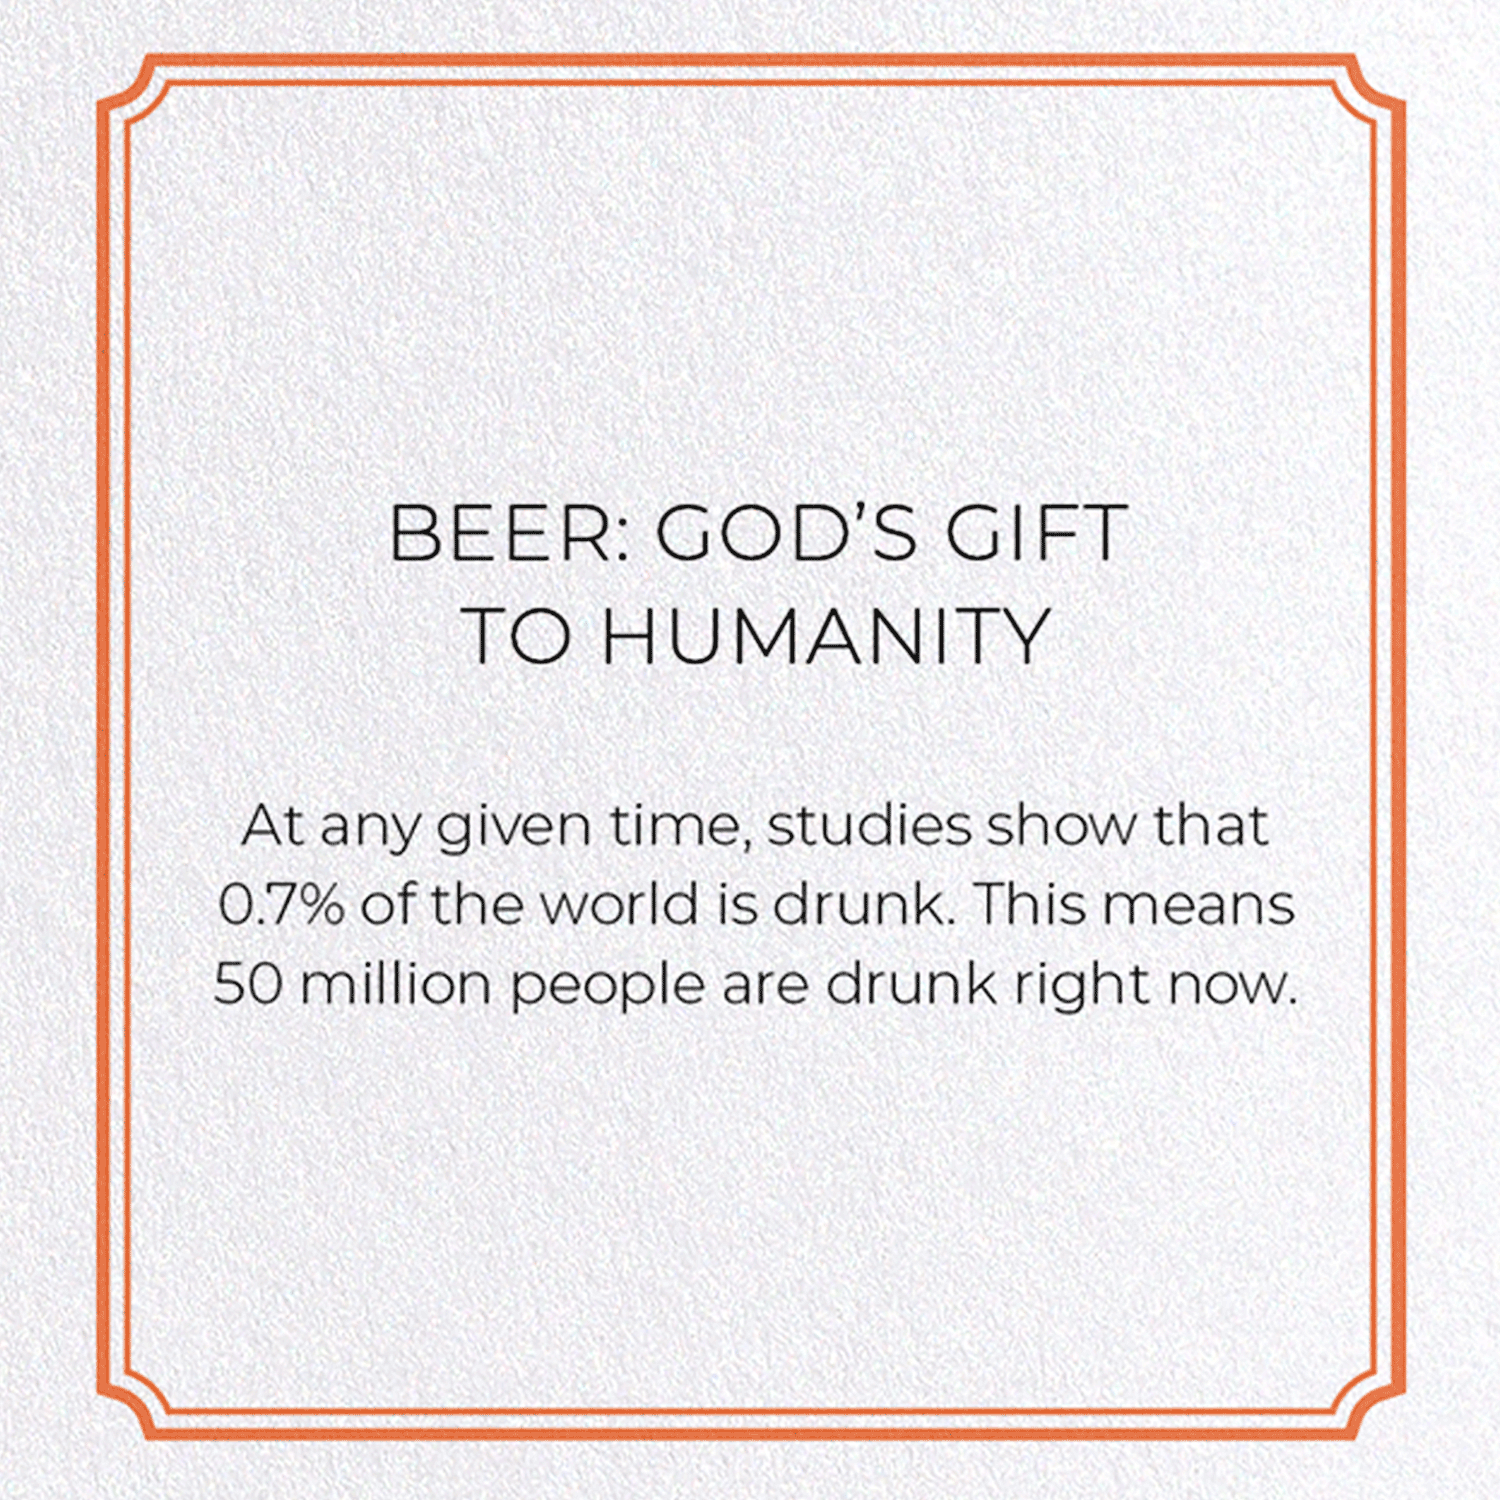 BEER: GOD'S GIFT TO HUMANITY